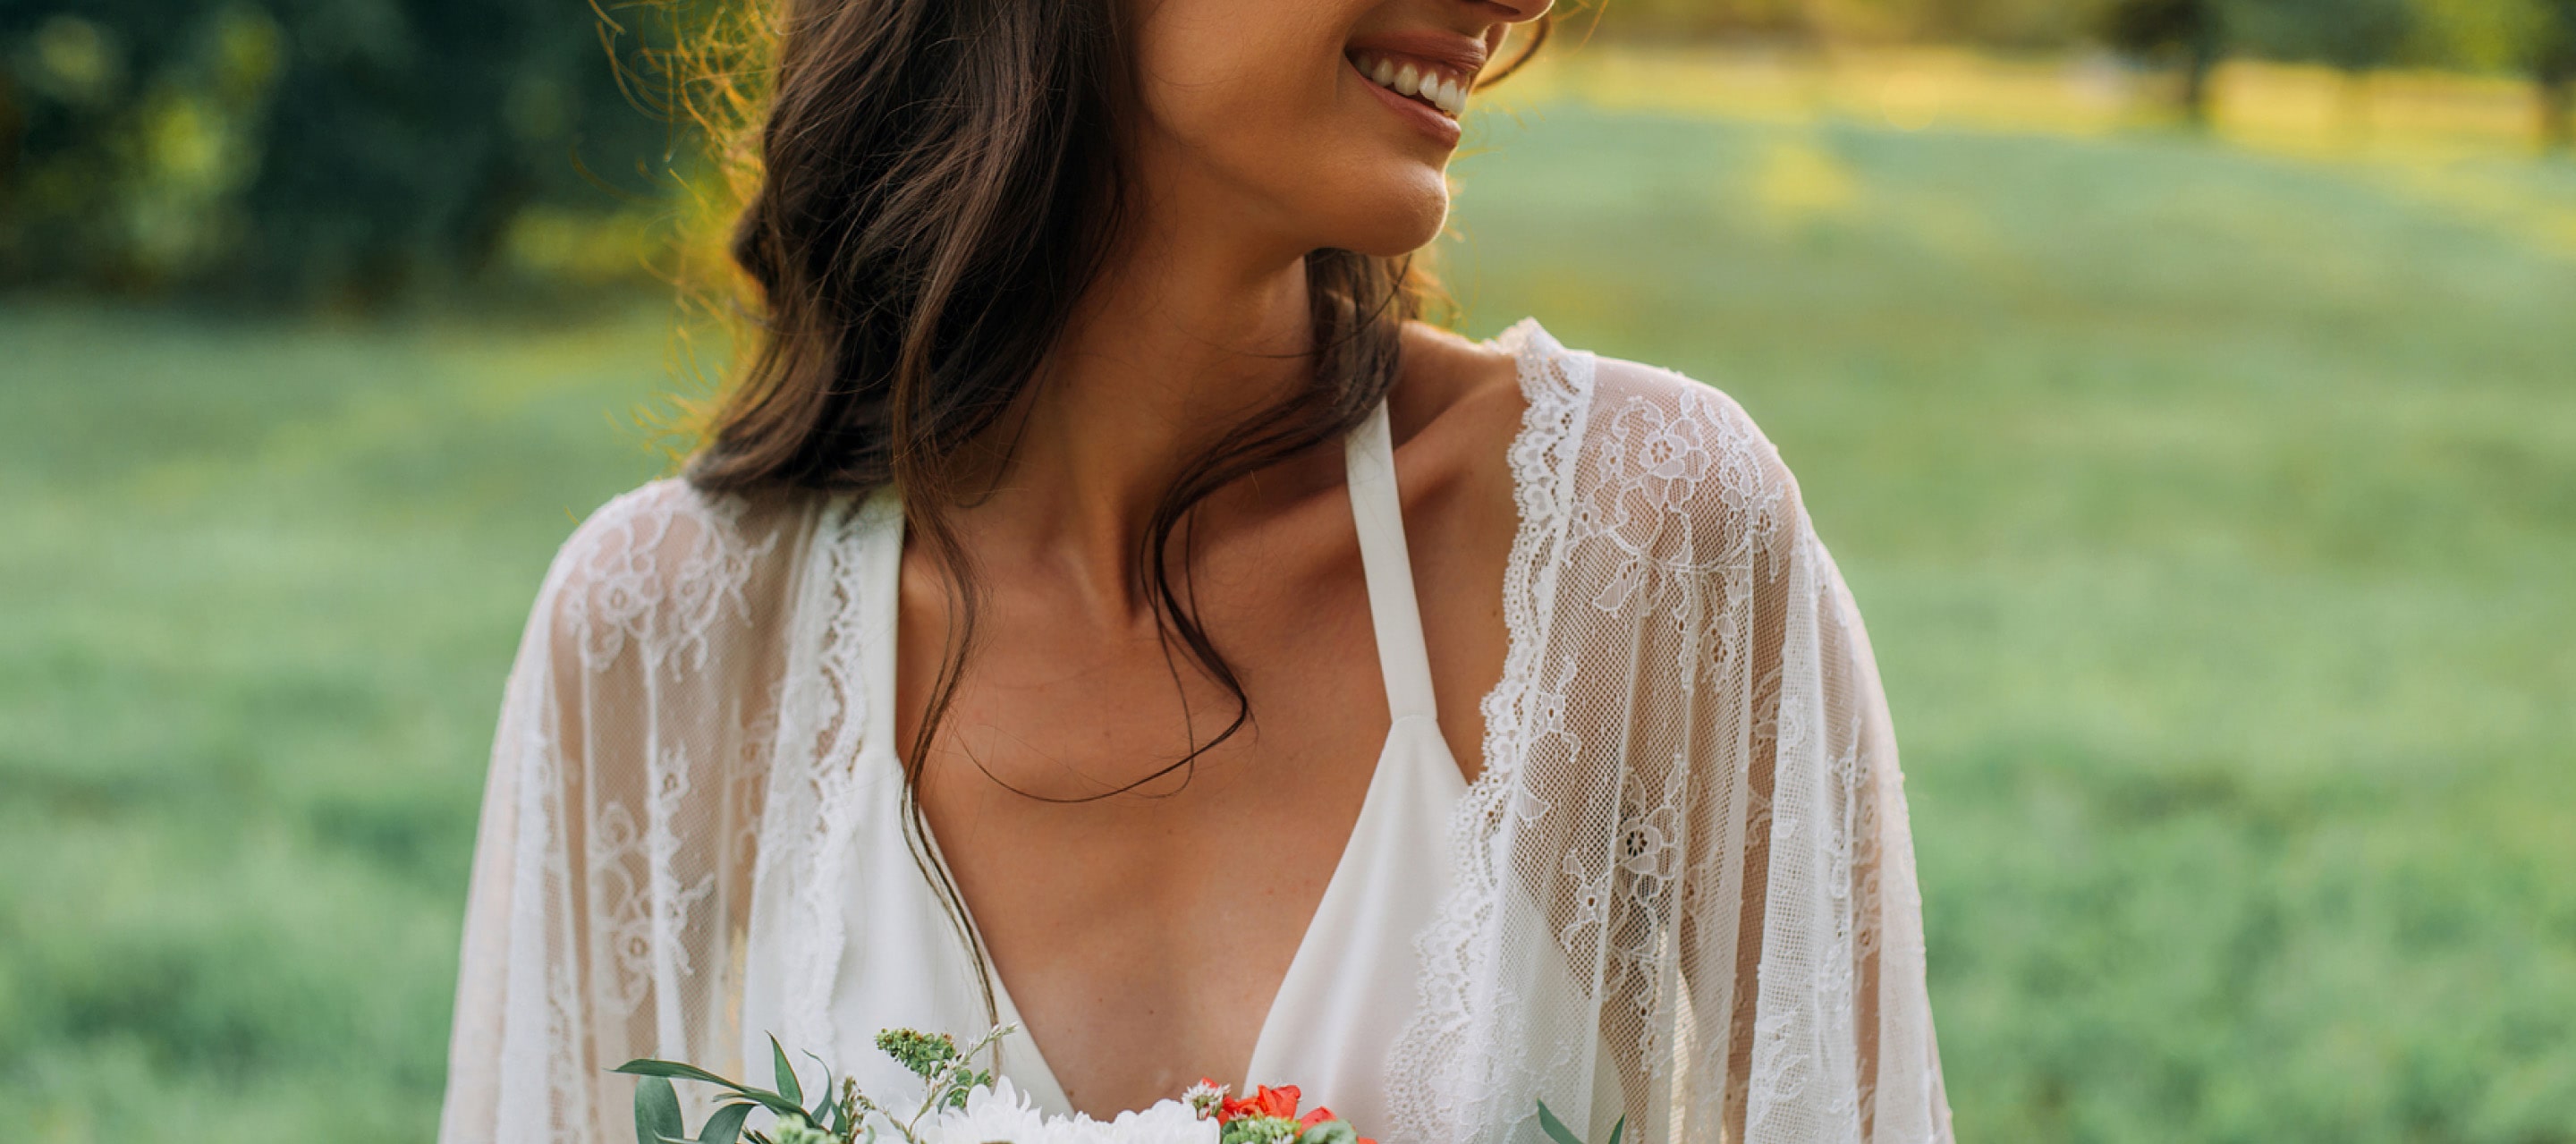 Where to Sell Your Wedding Dress Online after the Big Day